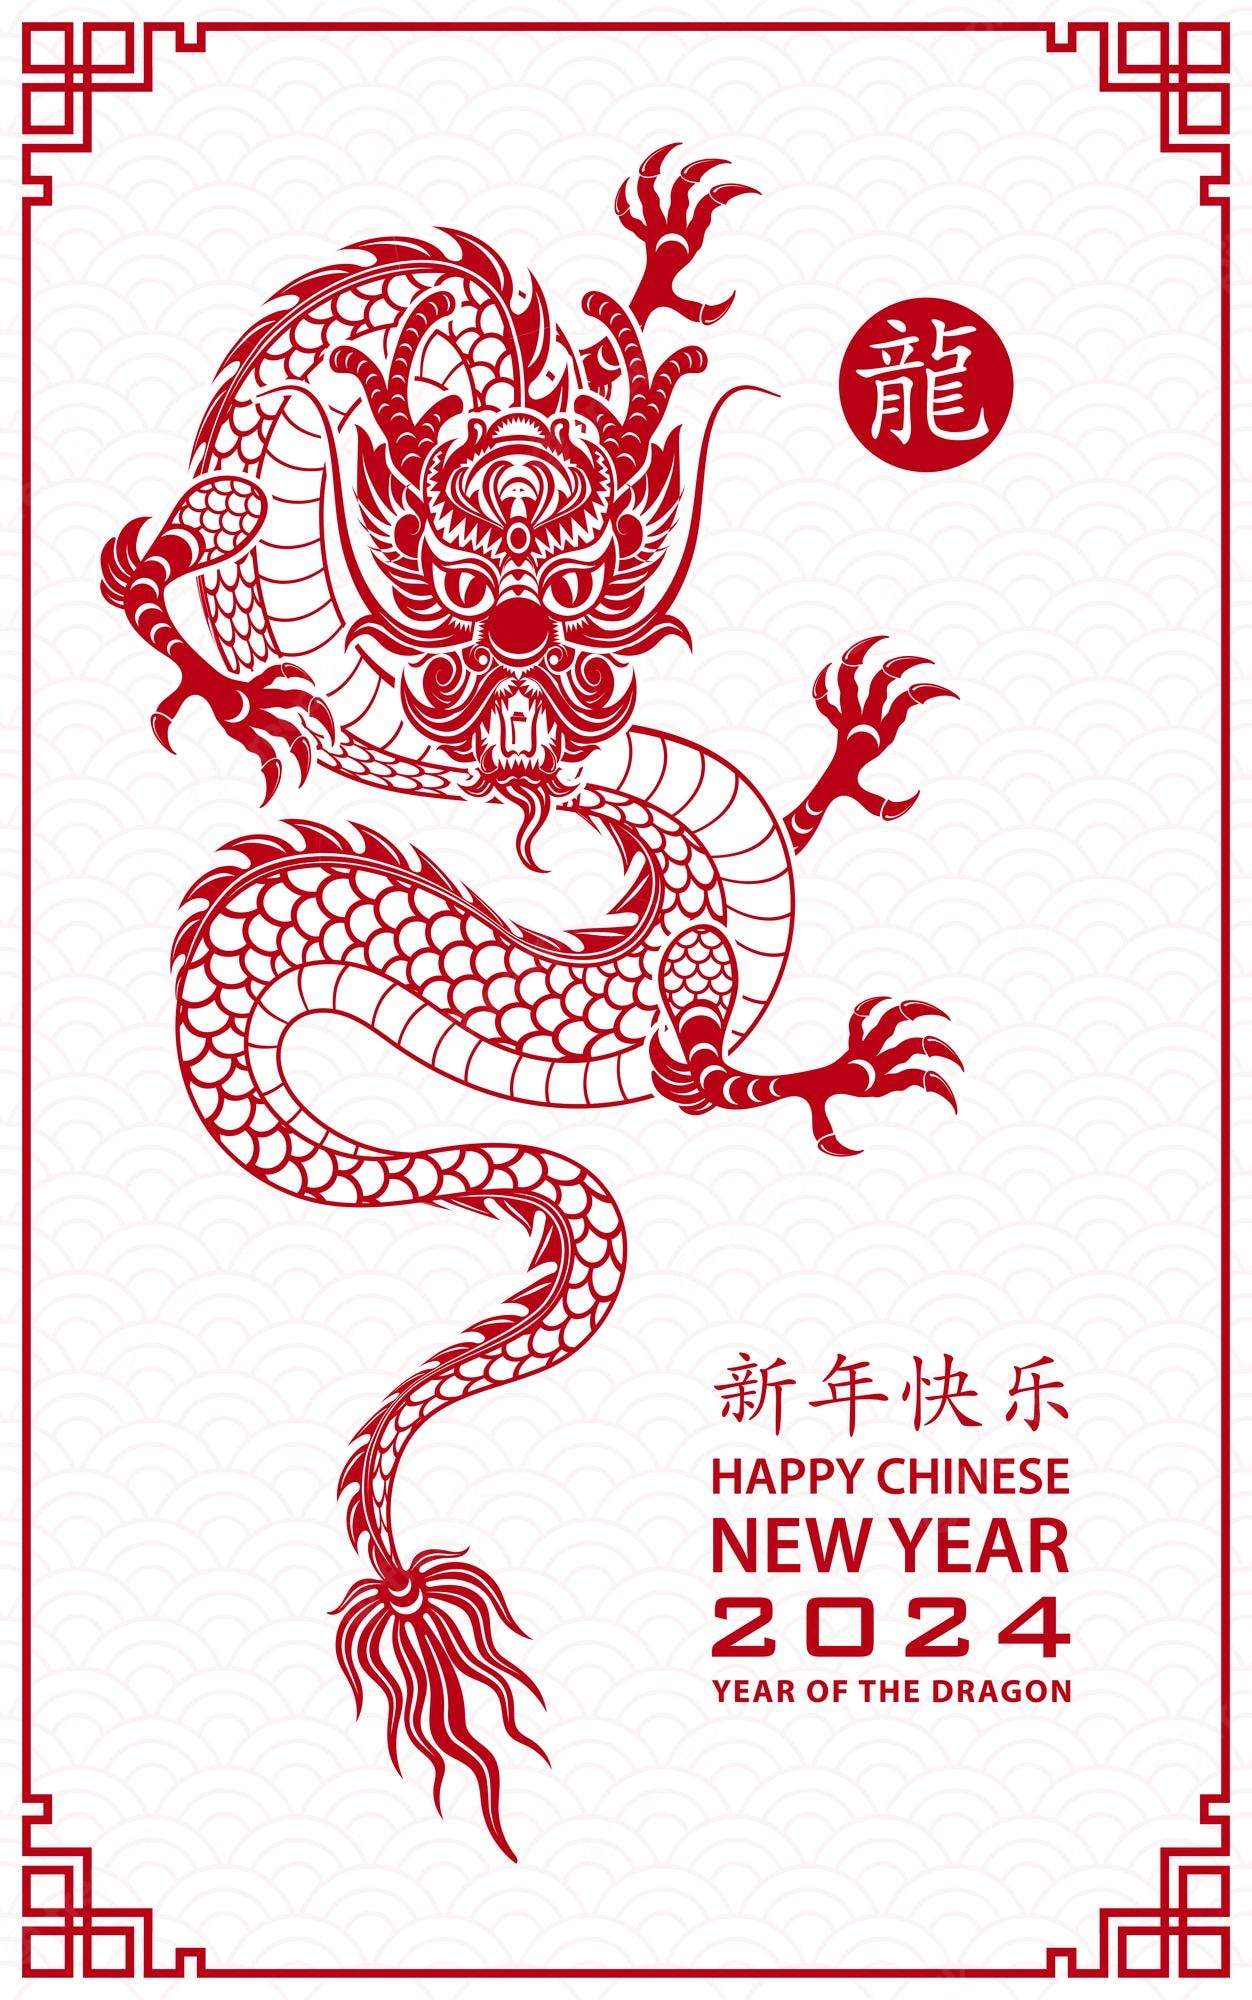 Premium Vector. Happy chinese new year 2024 zodiac sign year of the dragon